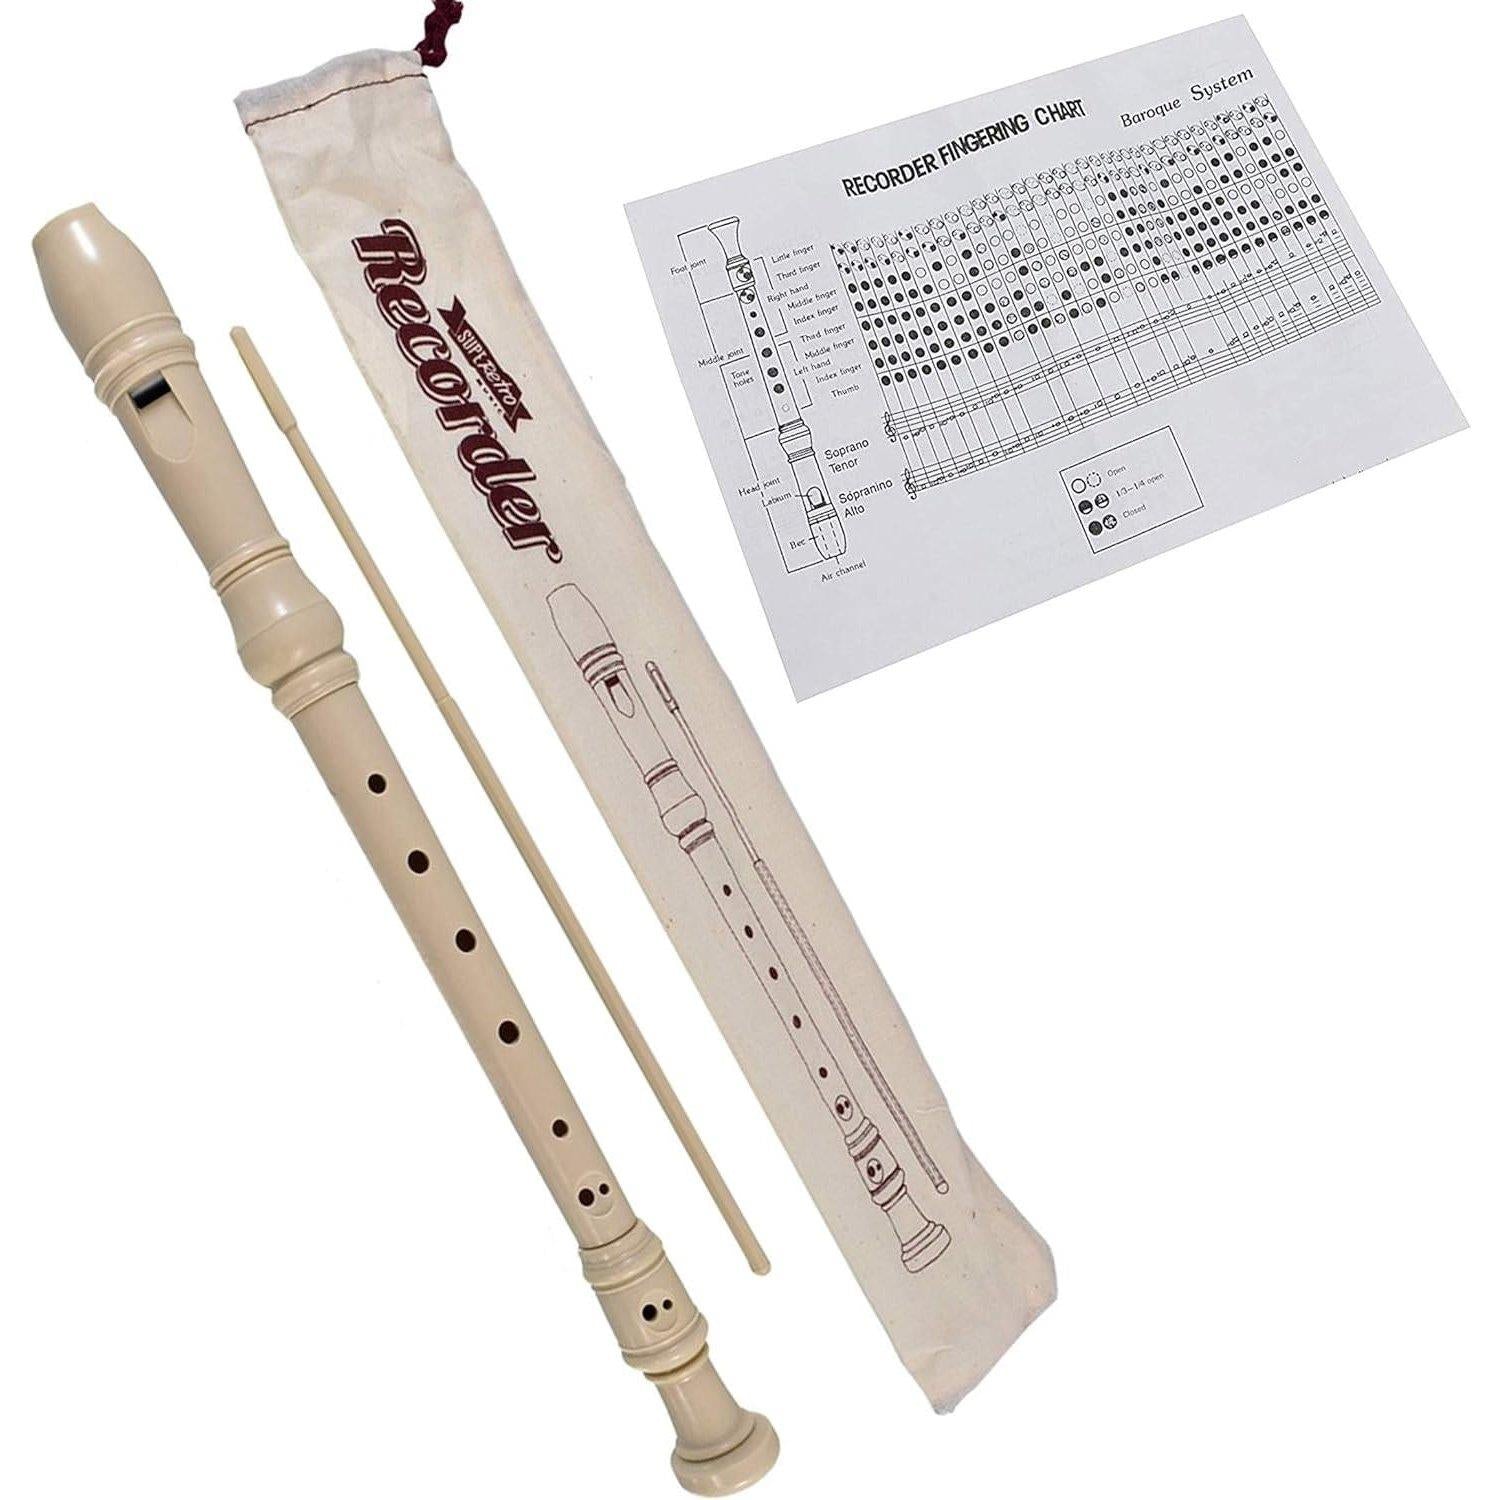 The Magic Toy Shop Recorder Recorder & Cleaning Rod with Storage Bag and Instructions